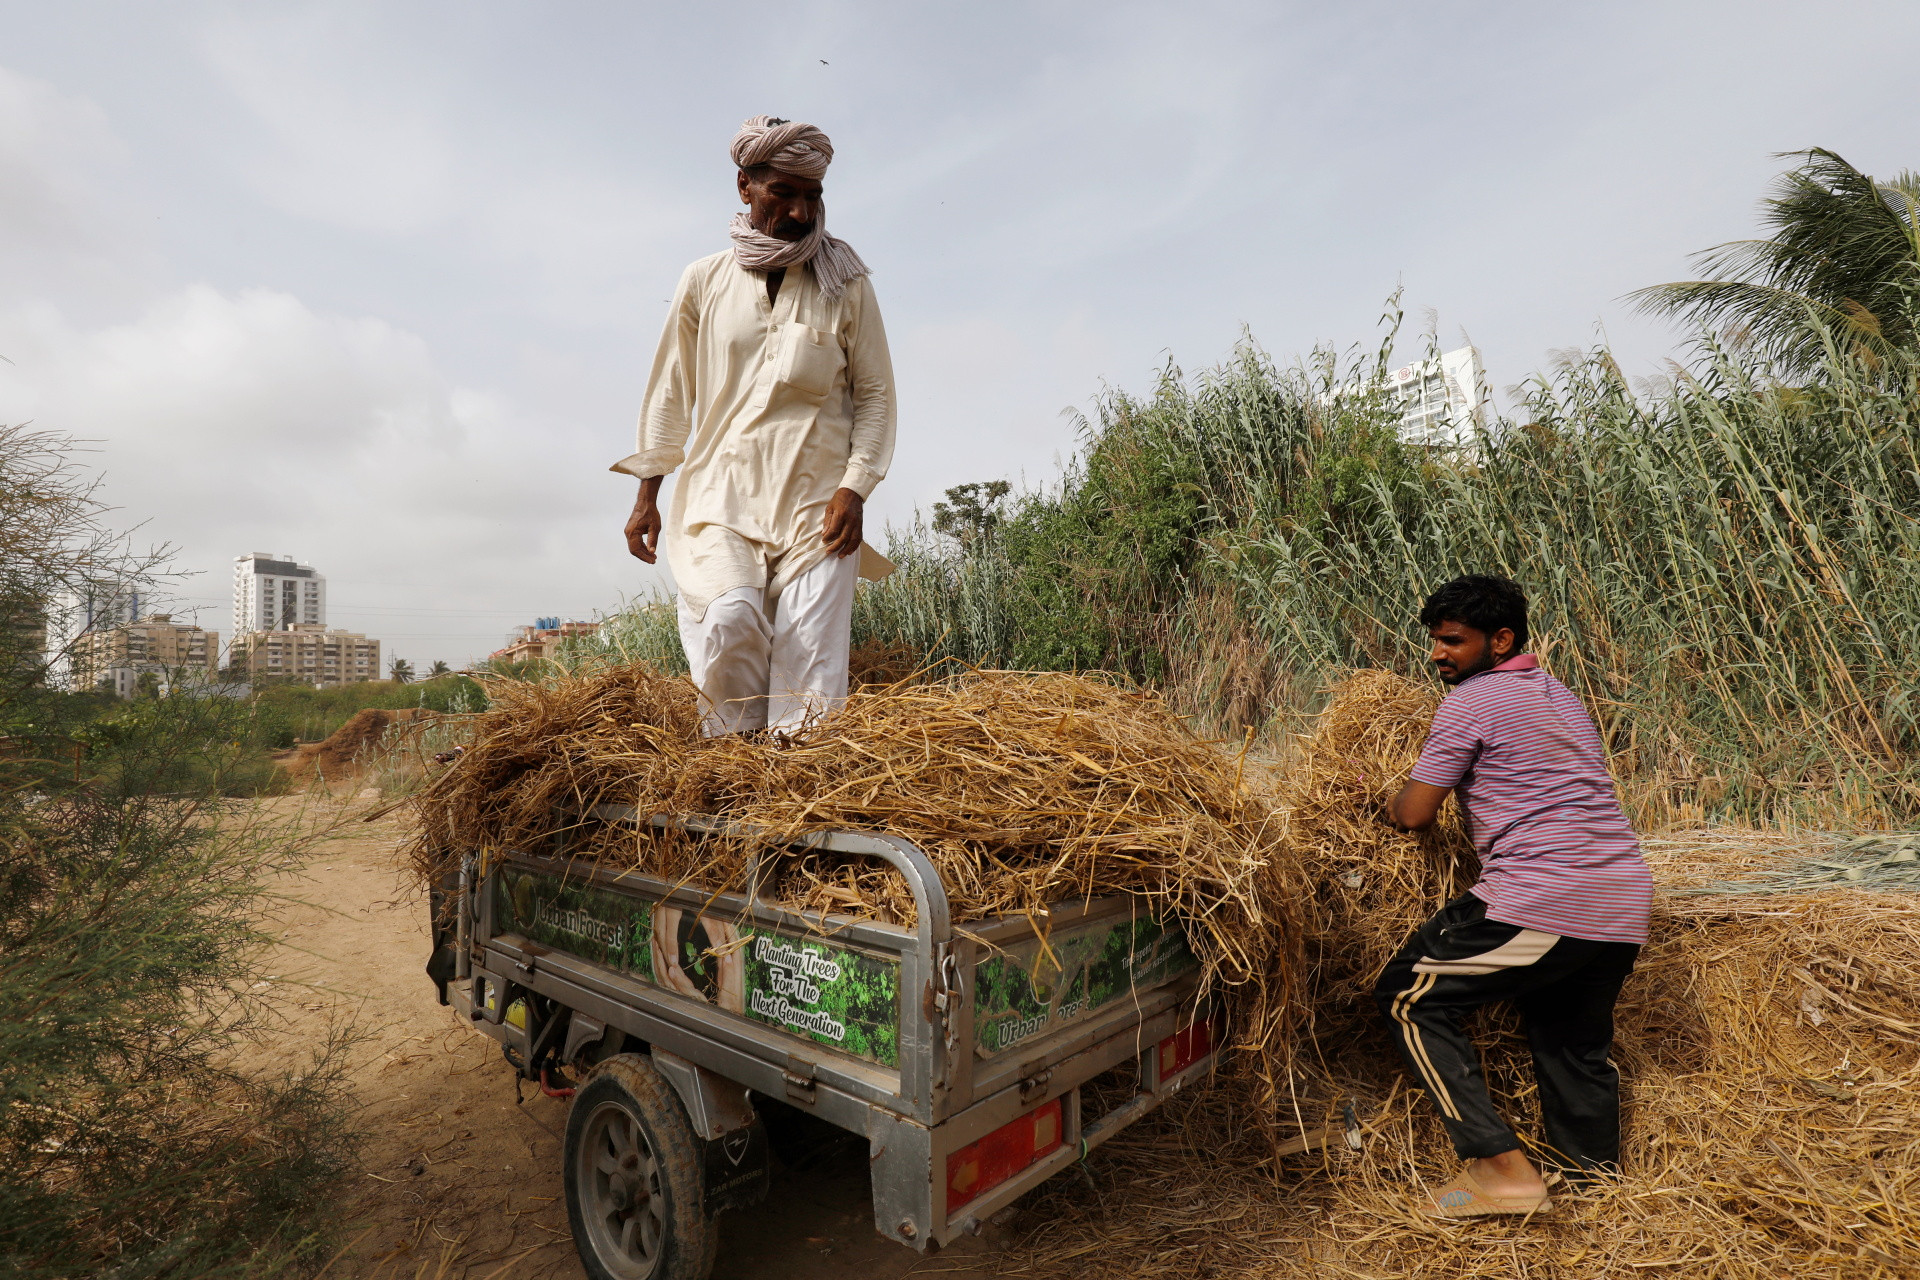 Mulazim Hussain collects dry grass in his electric rickshaw in Karachi, July 9, 2021. REUTERS